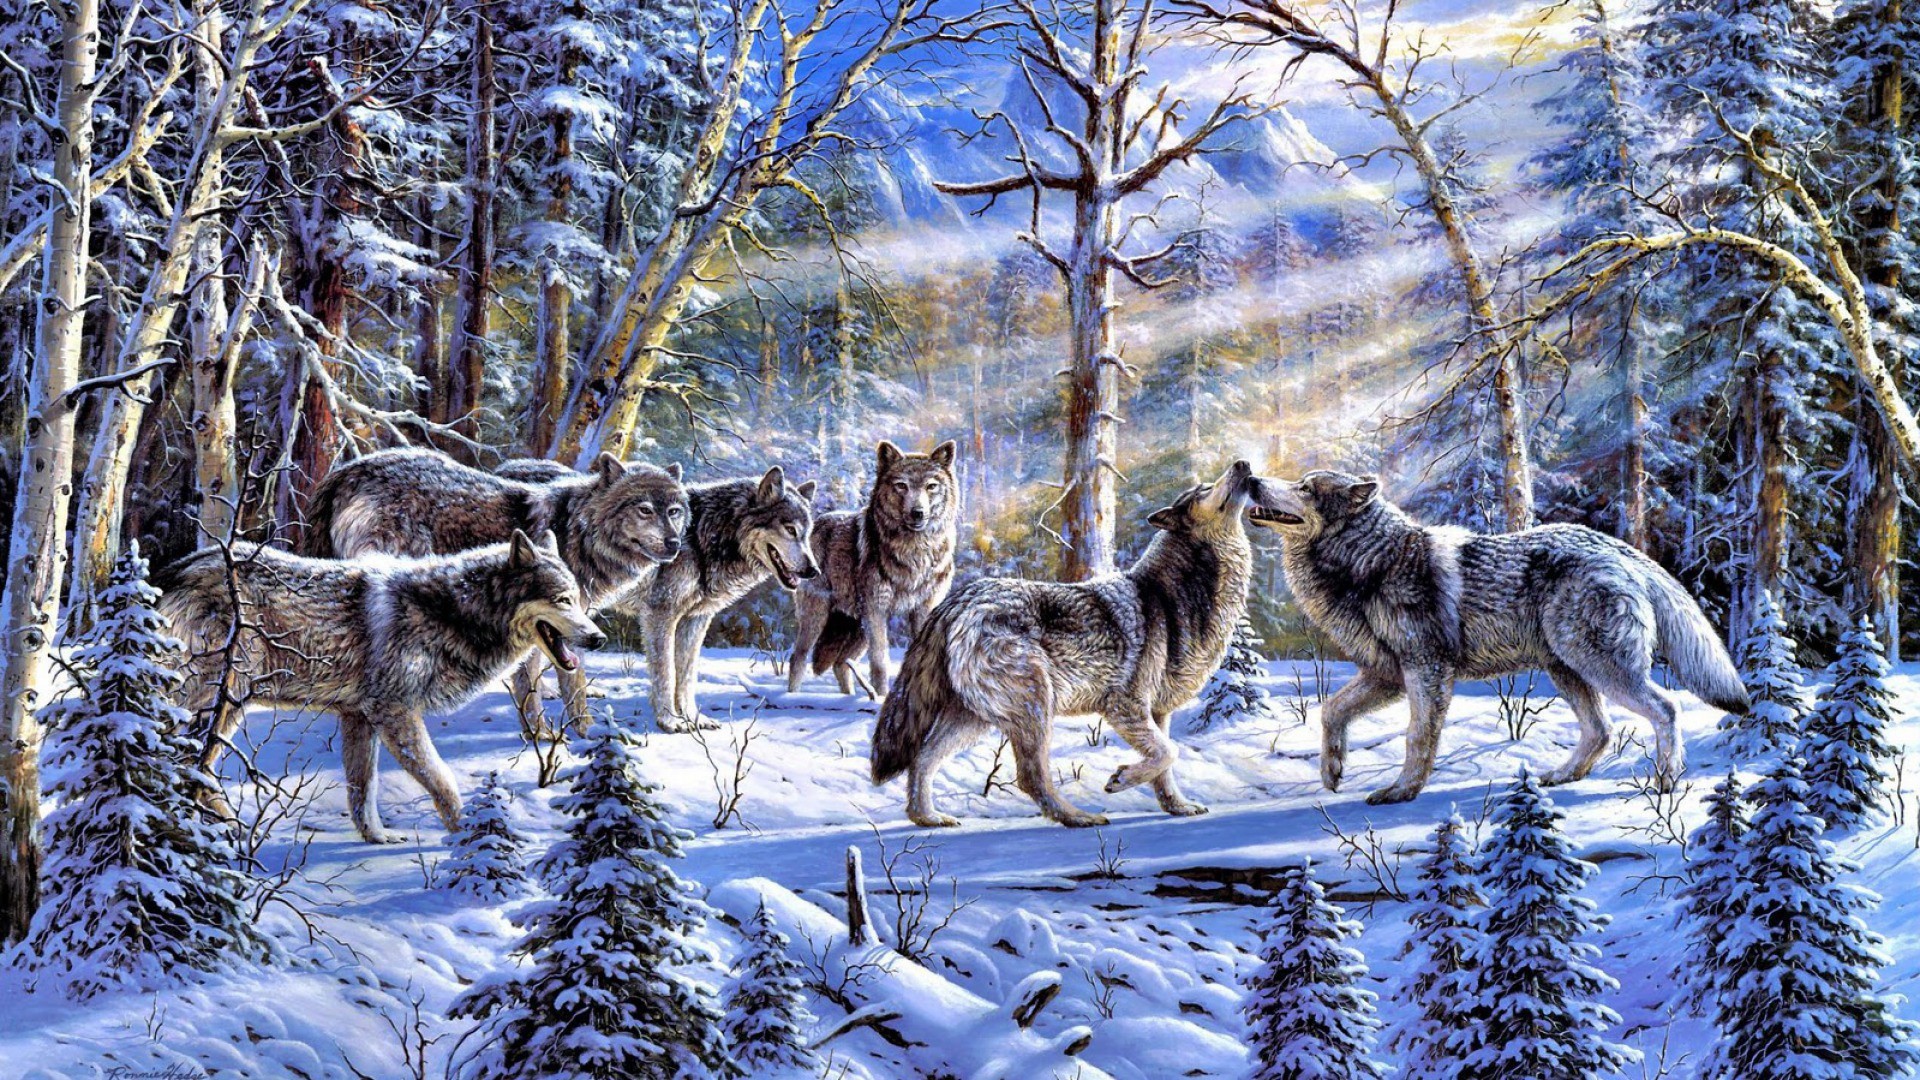 Pack Of Wolves In The Snow Wallpaper And Image